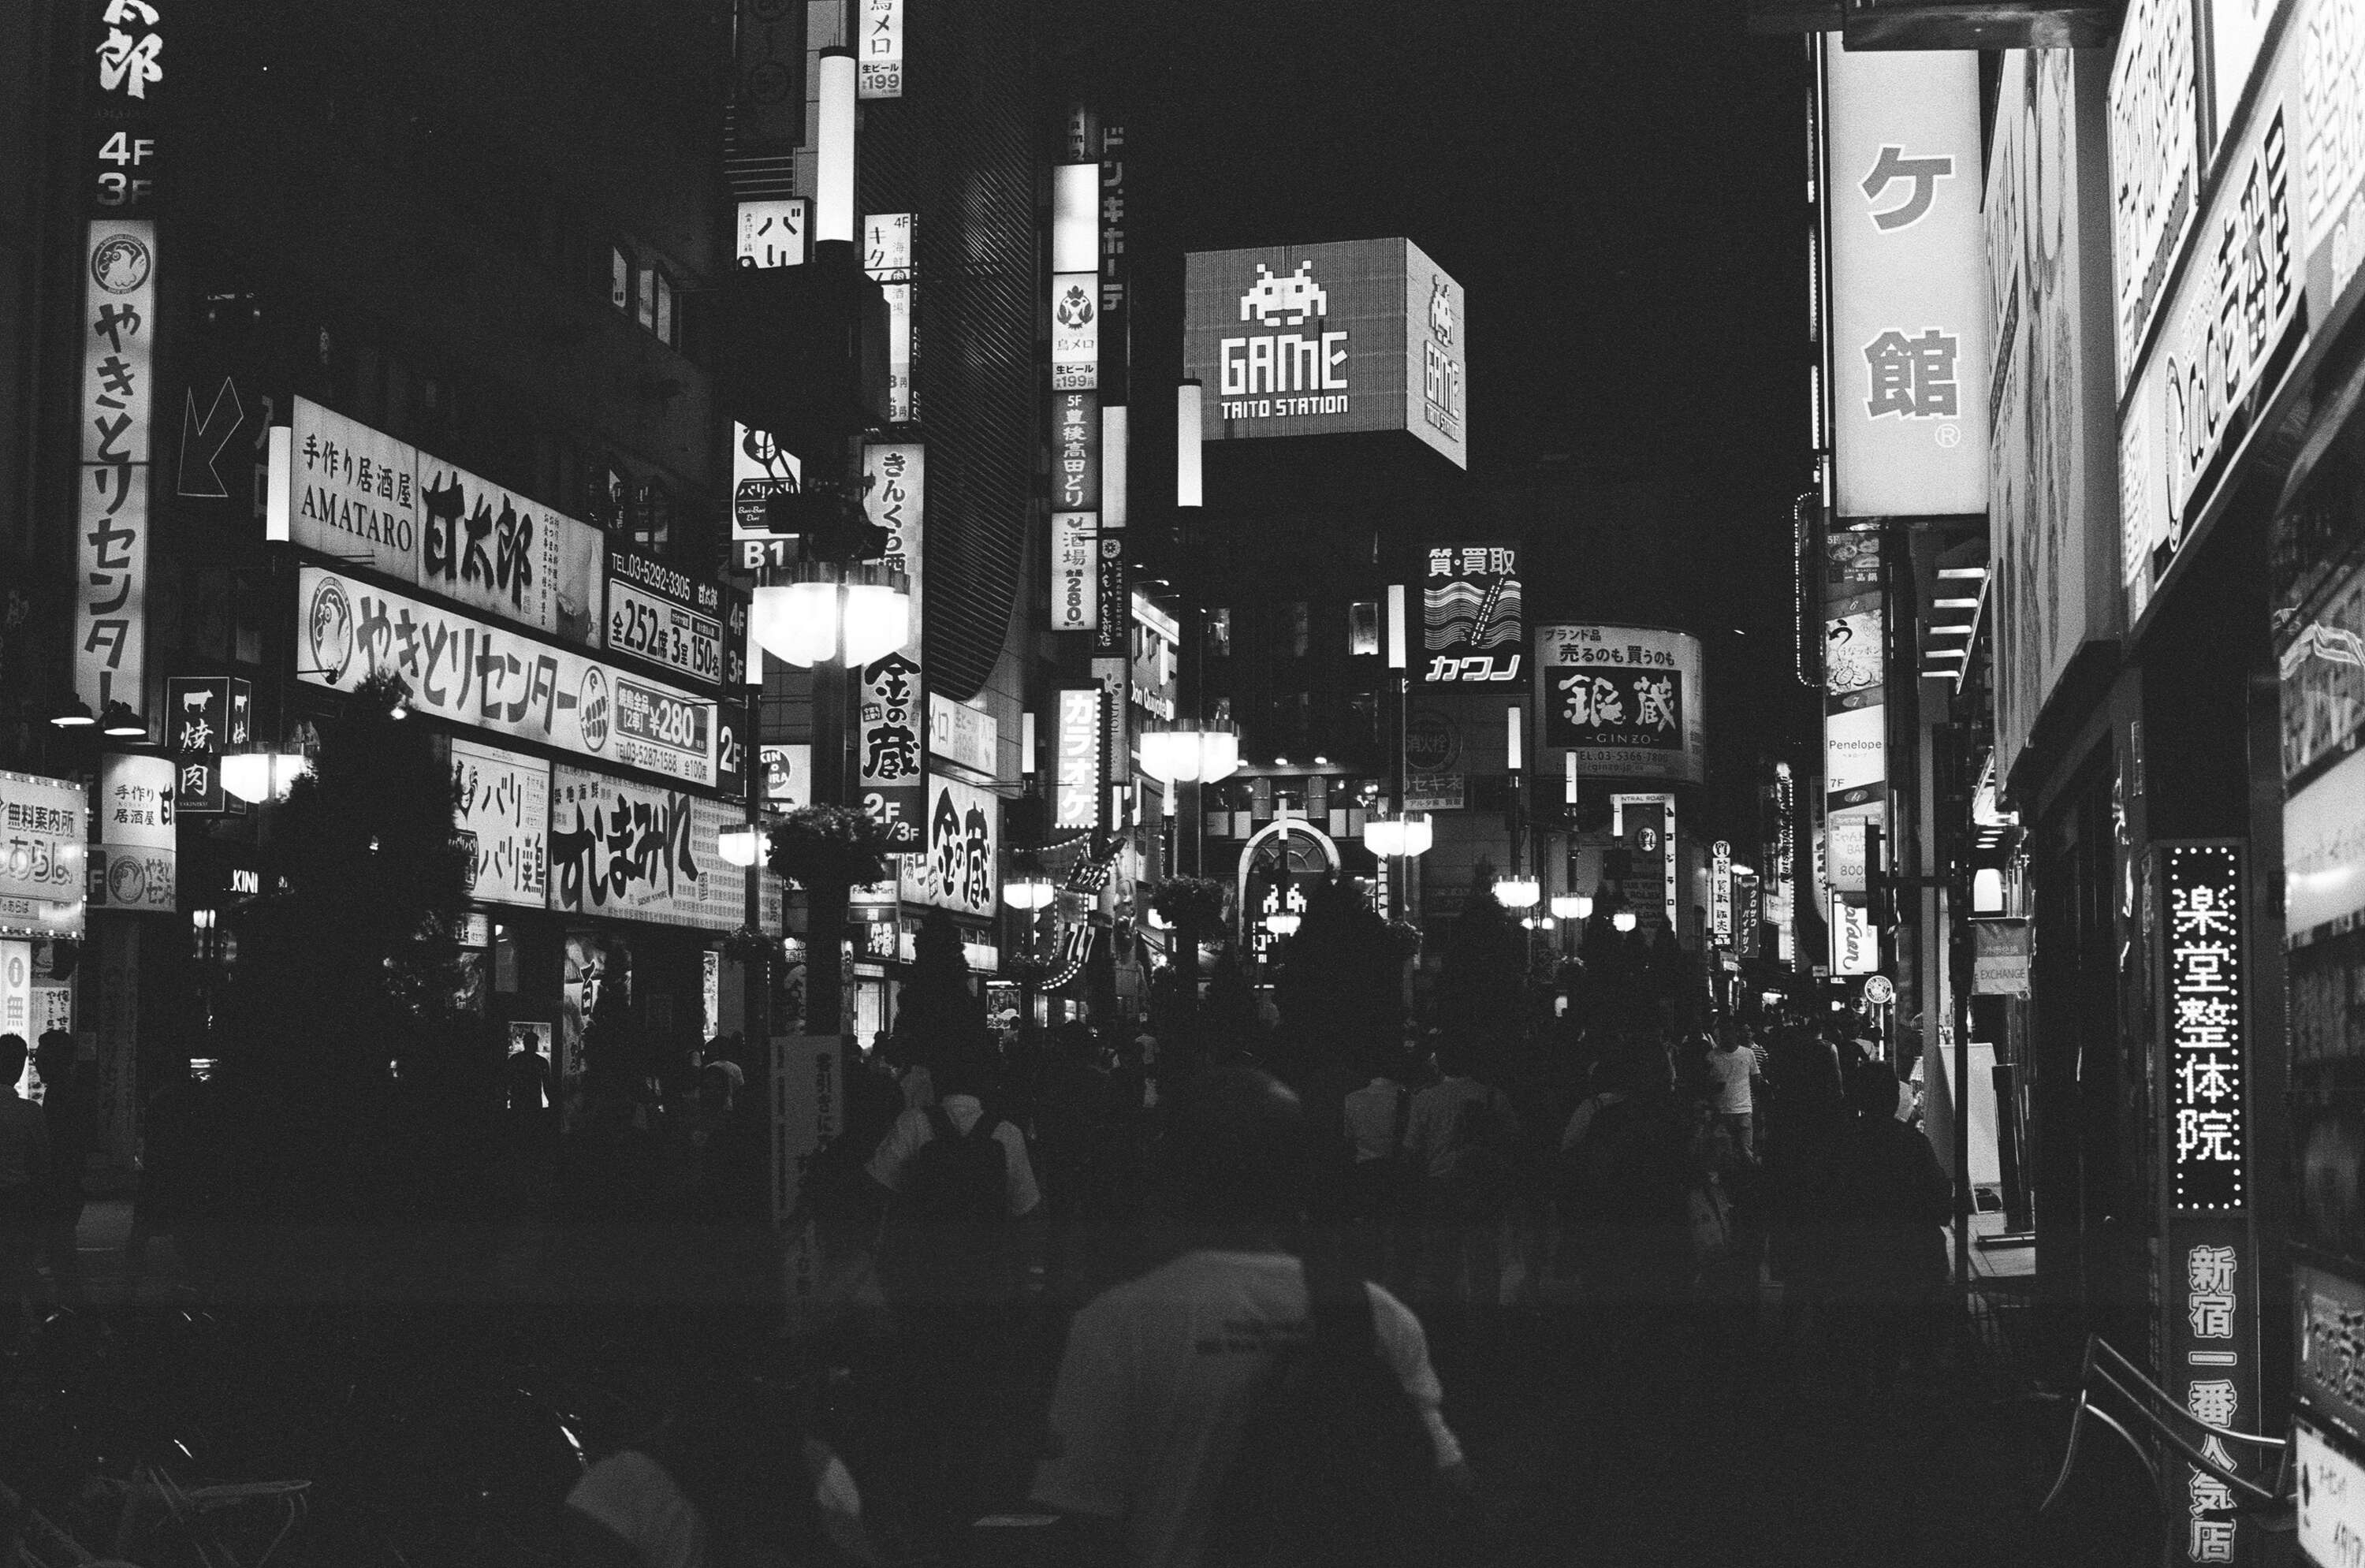 Black and white photo of a crowded street in Tokyo with neon billboards lighting up the street.